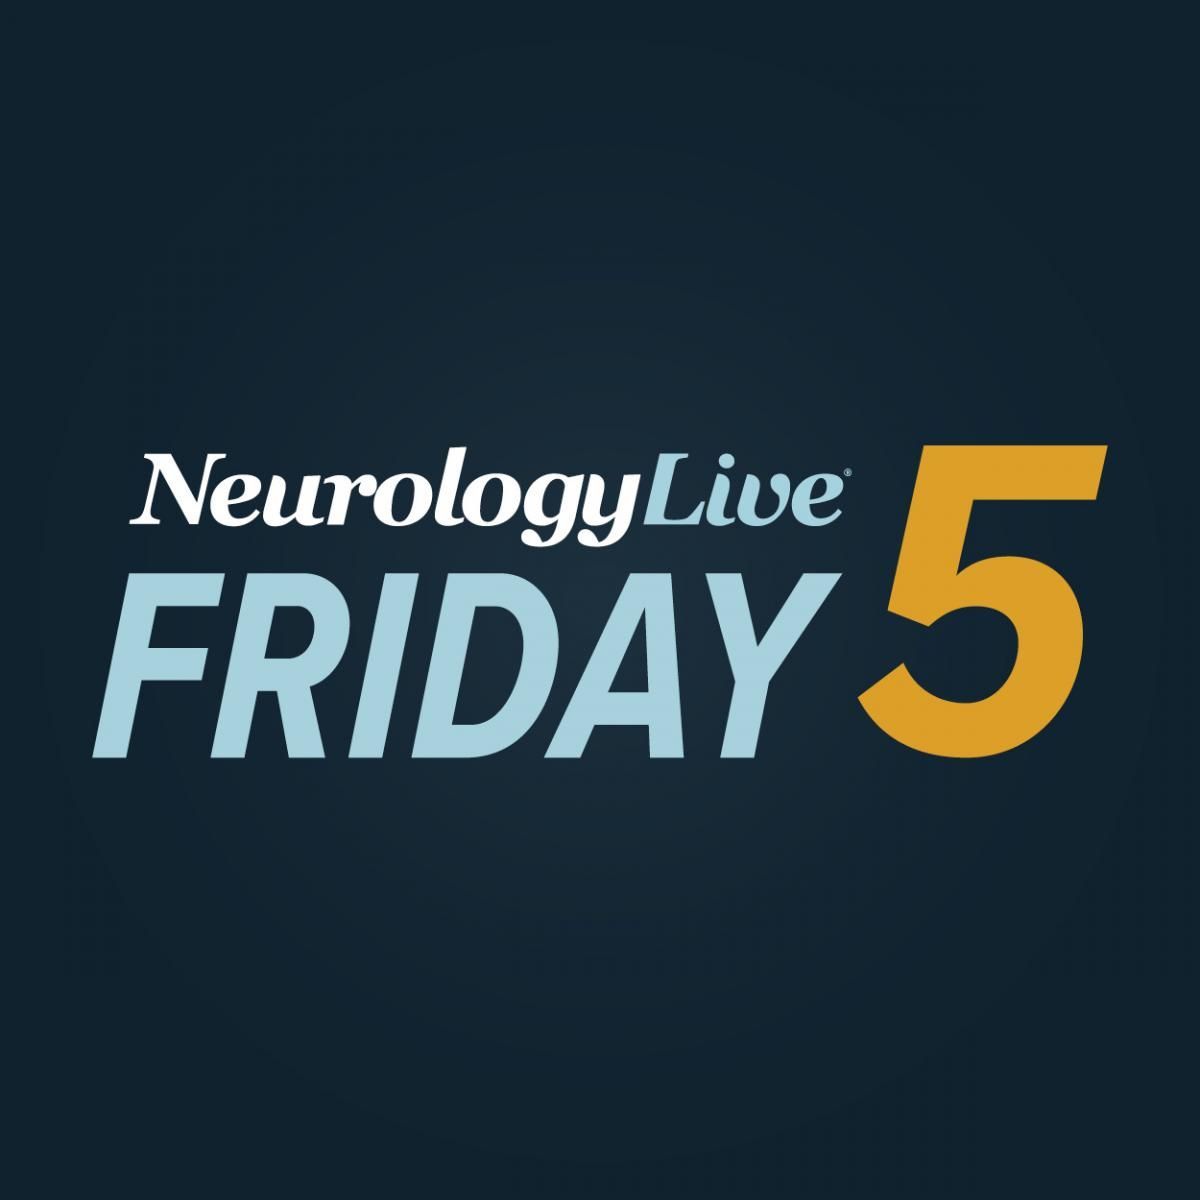 Take 5️⃣ minutes to stay up-to-date with our #FridayFive! 👉 @US_FDA Action Update 👉 TBI Awareness @nyulangone 👉 @DrDaniAndrade @UofT 👉 Neurovoices @MichaelOkun @ParkinsonDotOrg 👉 NeurologyLive Insights @ClevelandClinic 🖐 neurologylive.com/view/neurology…